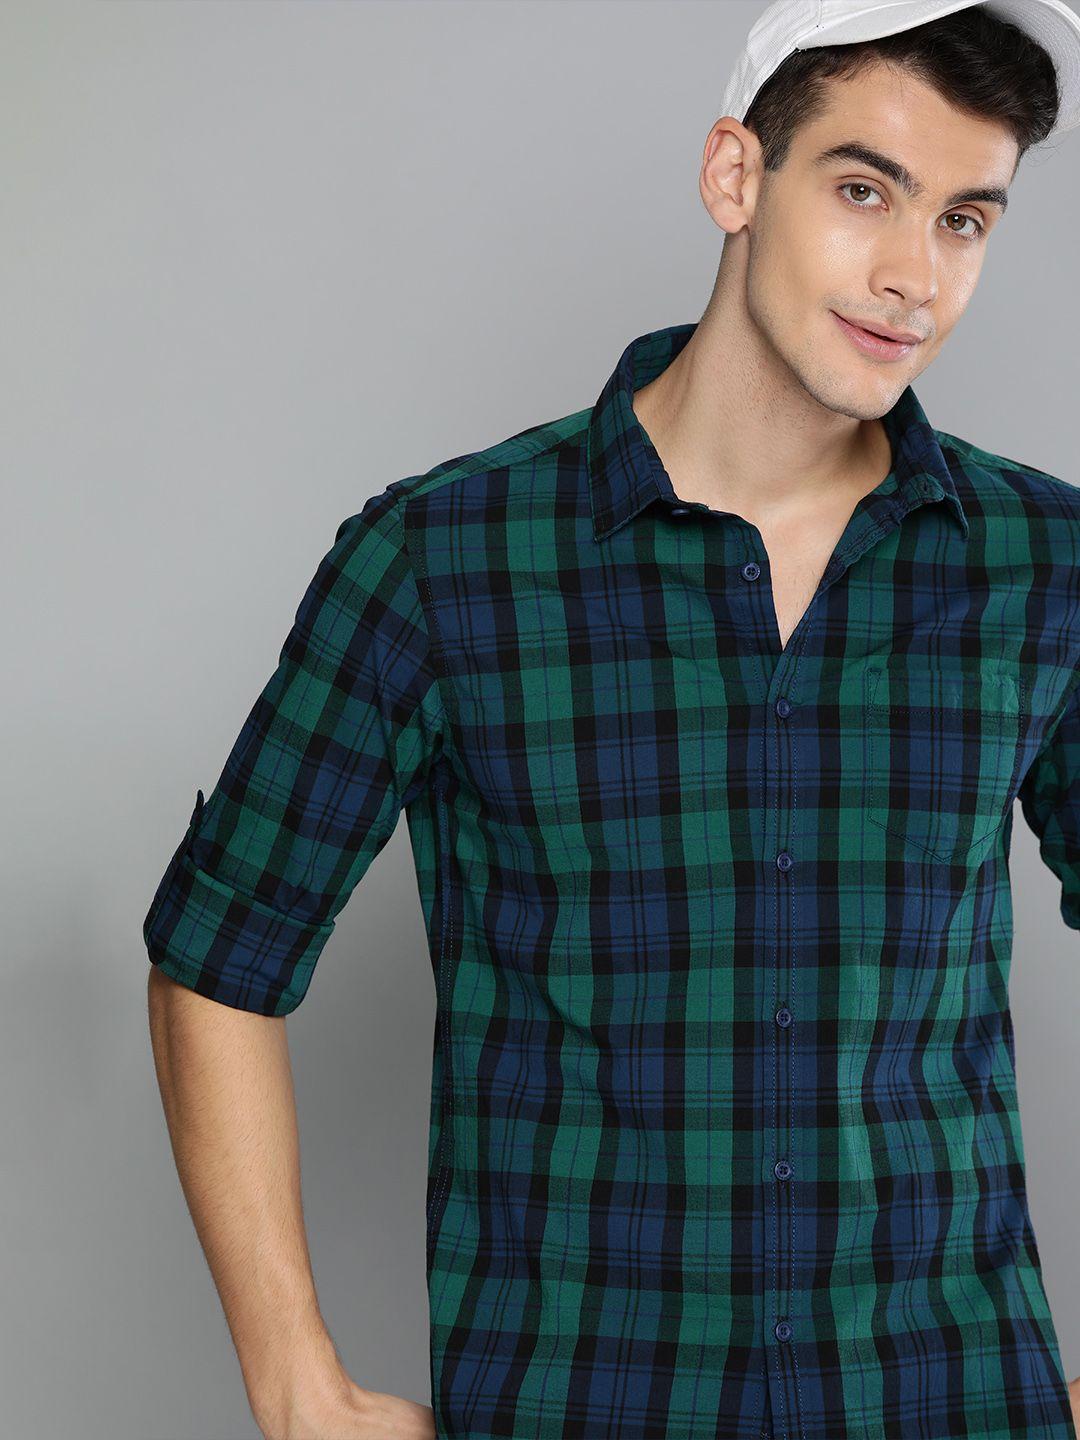 here&now men navy blue & green slim fit checked casual shirt